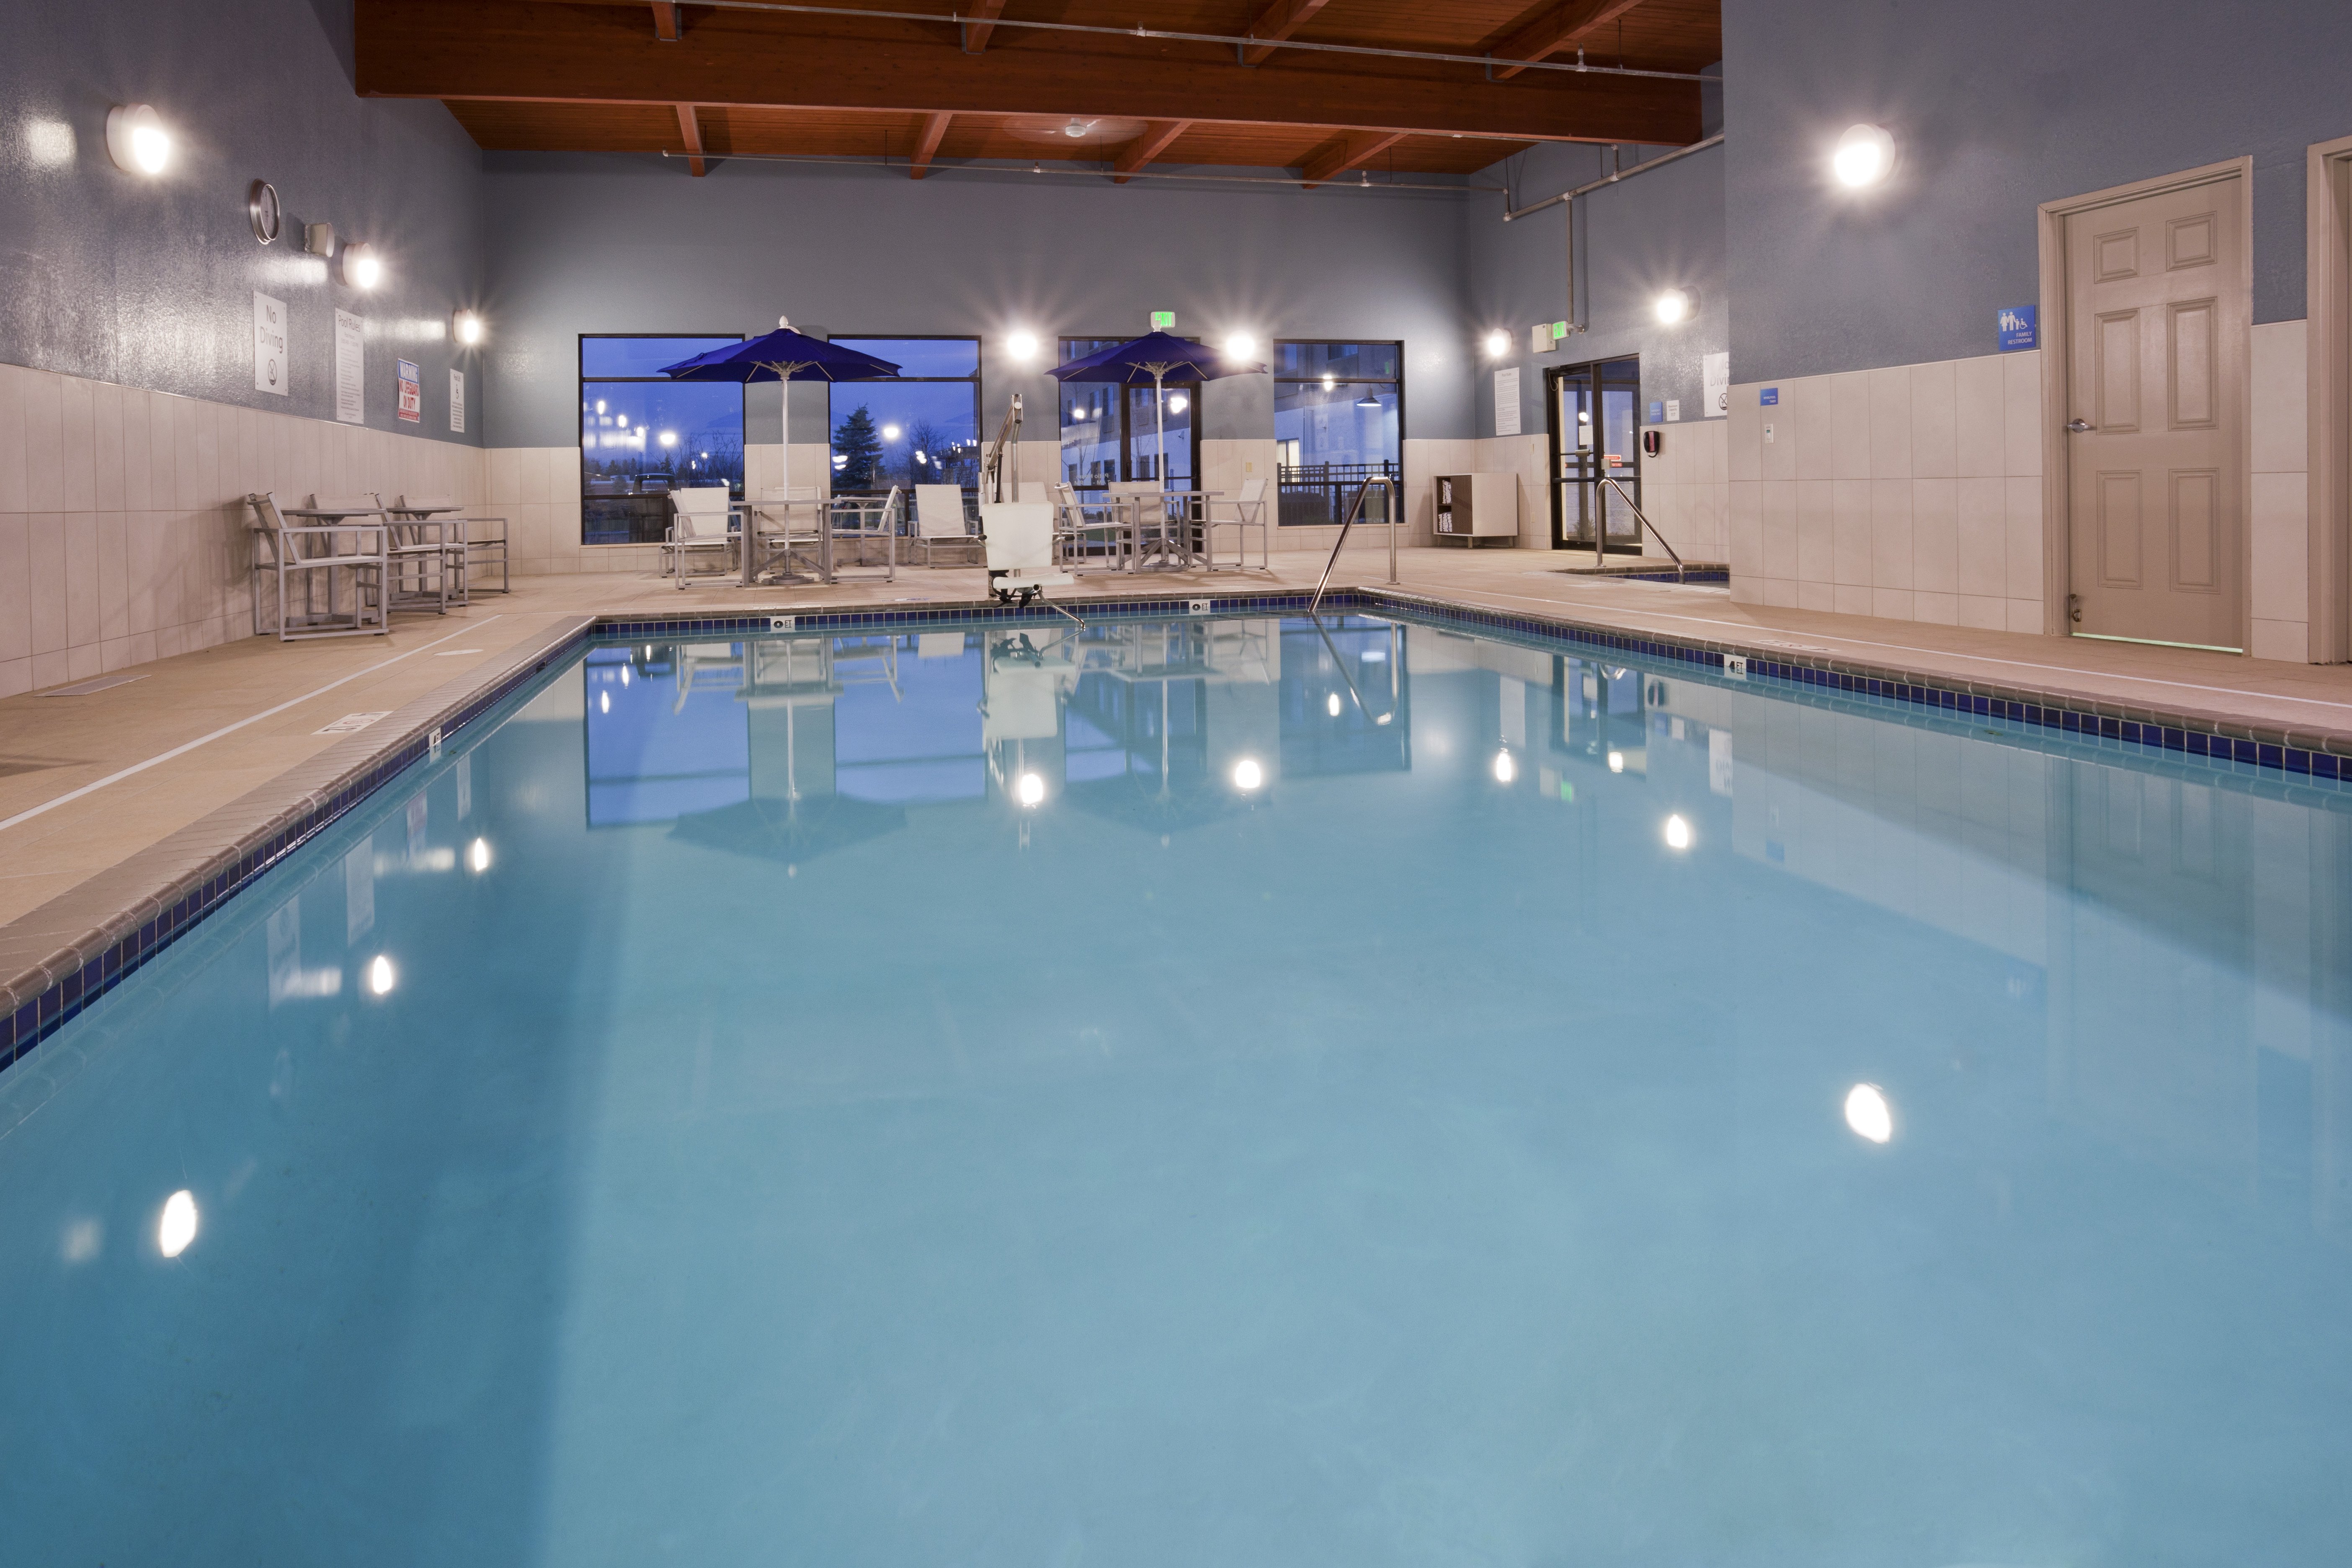 Our Minneapolis hotel offers a heated, indoor pool for its guests